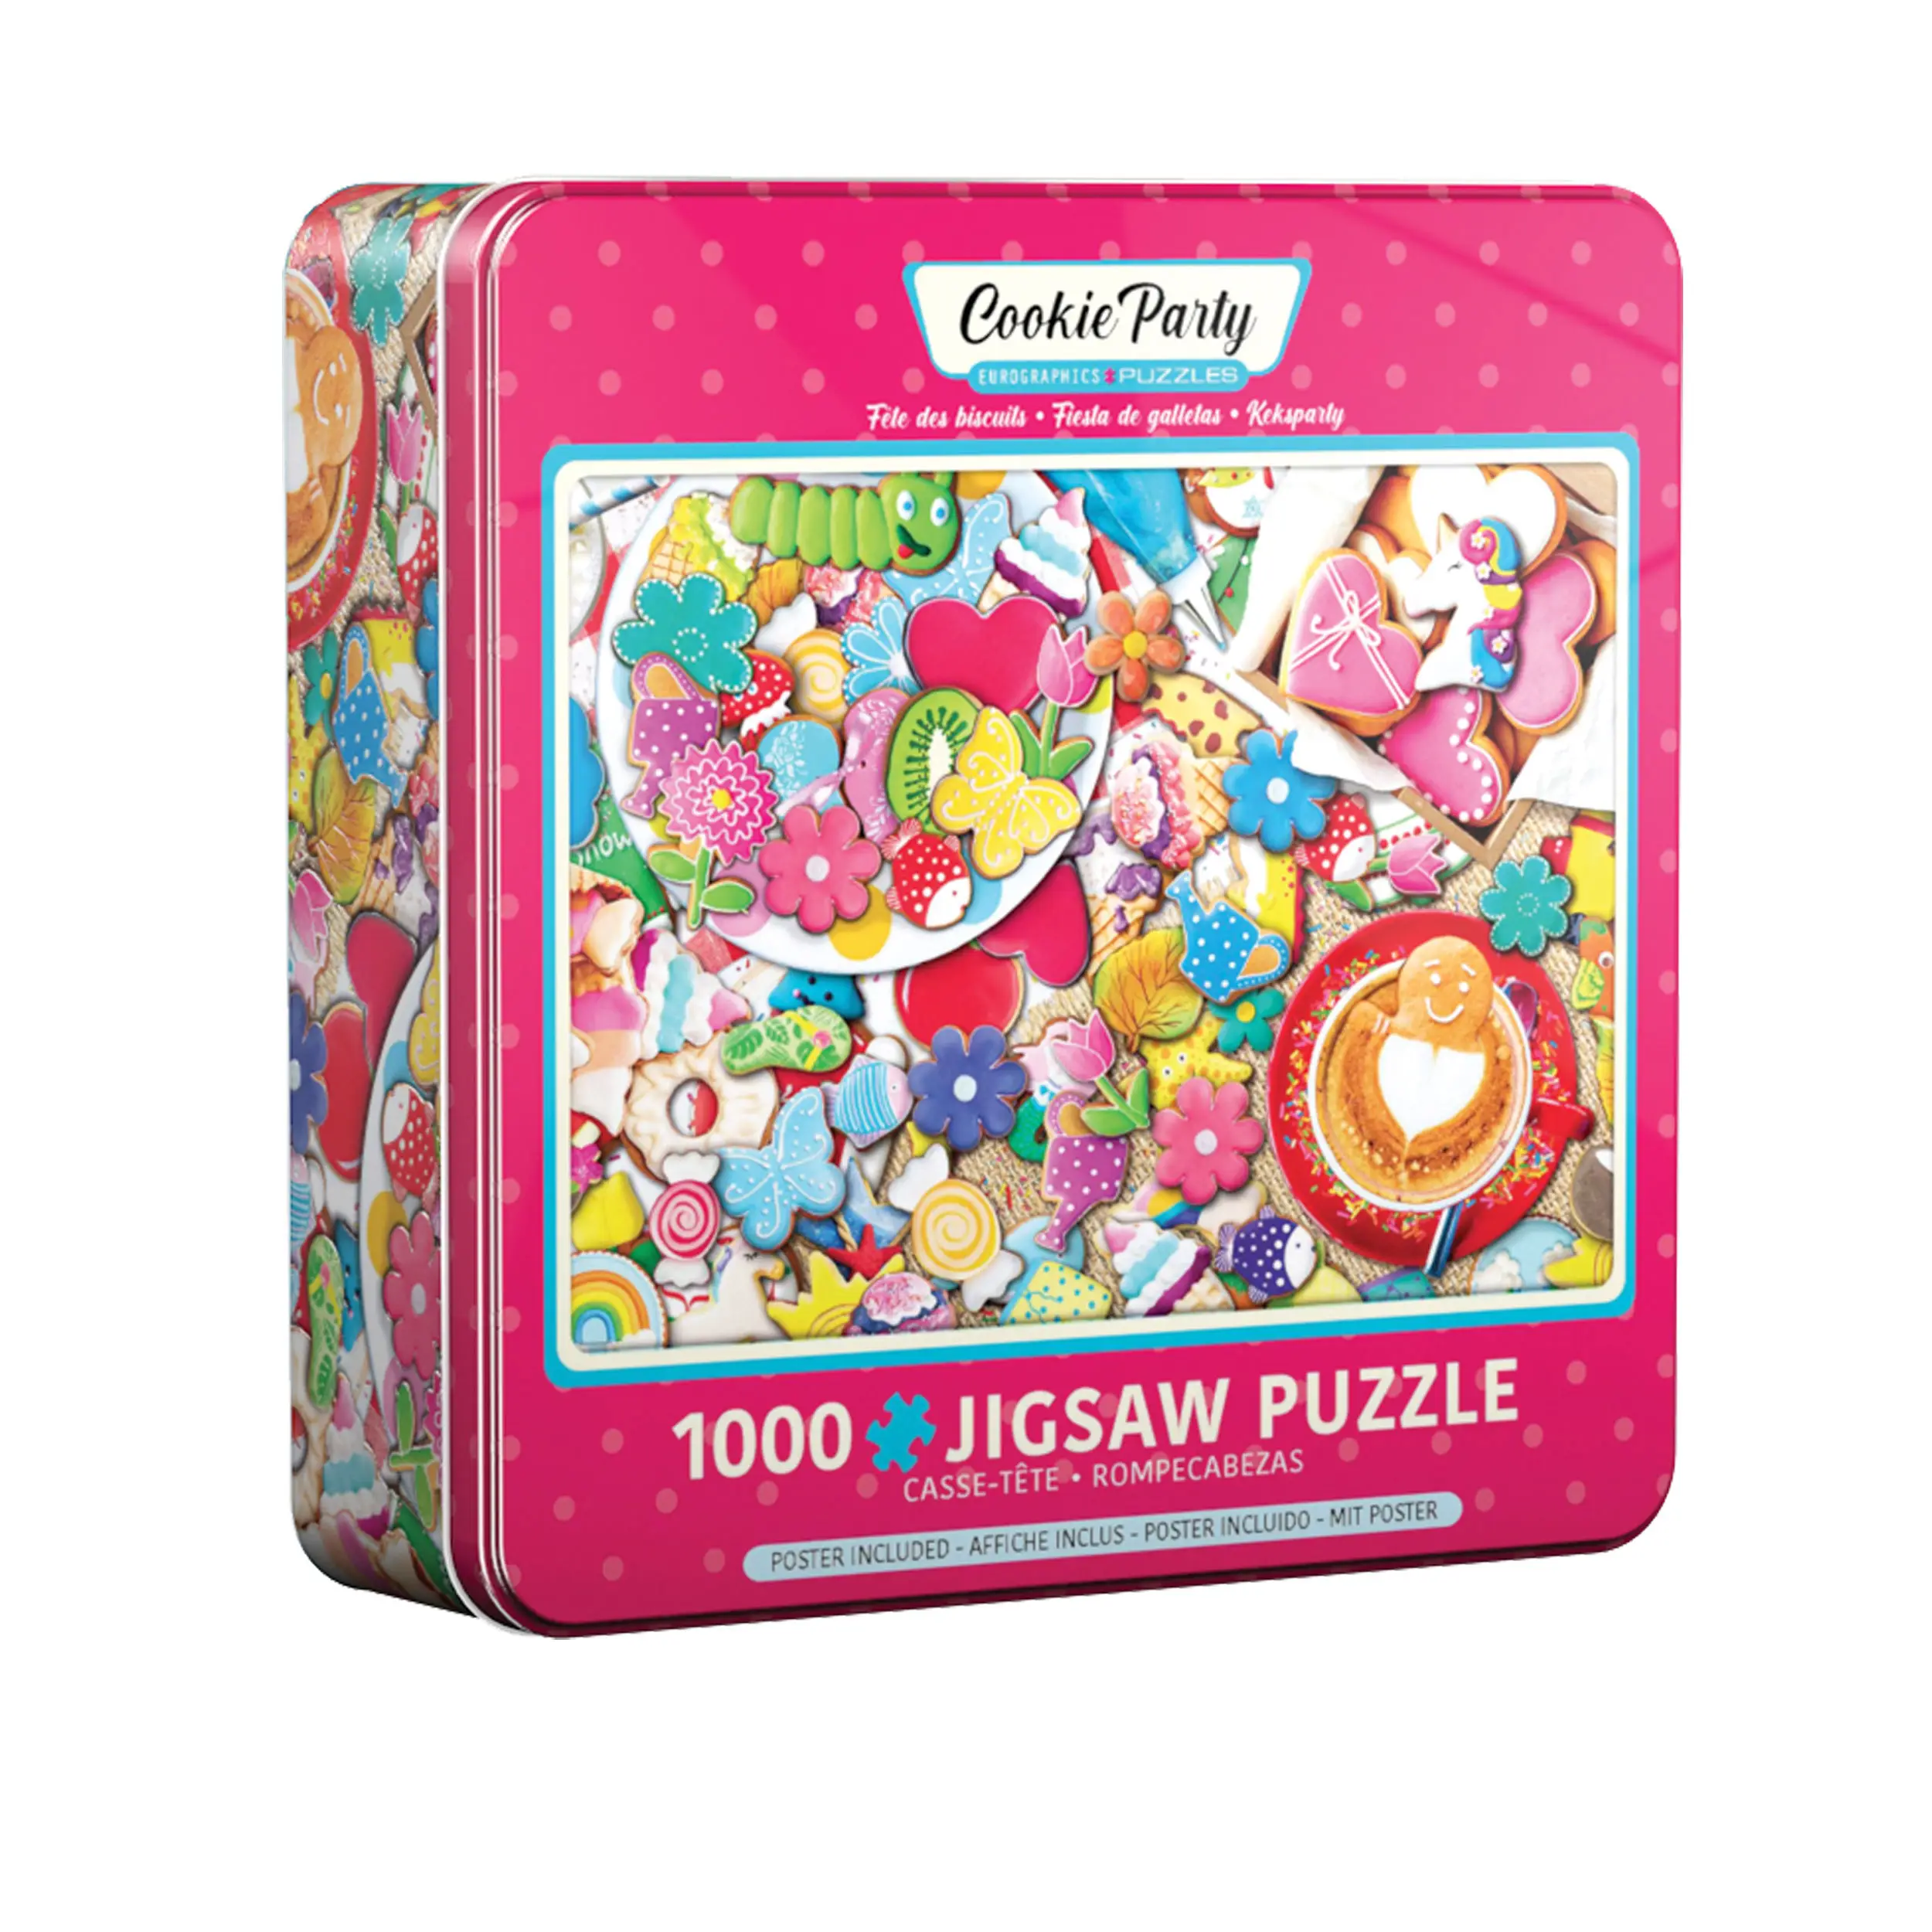 Puzzle in Puzzledose Party Kekse